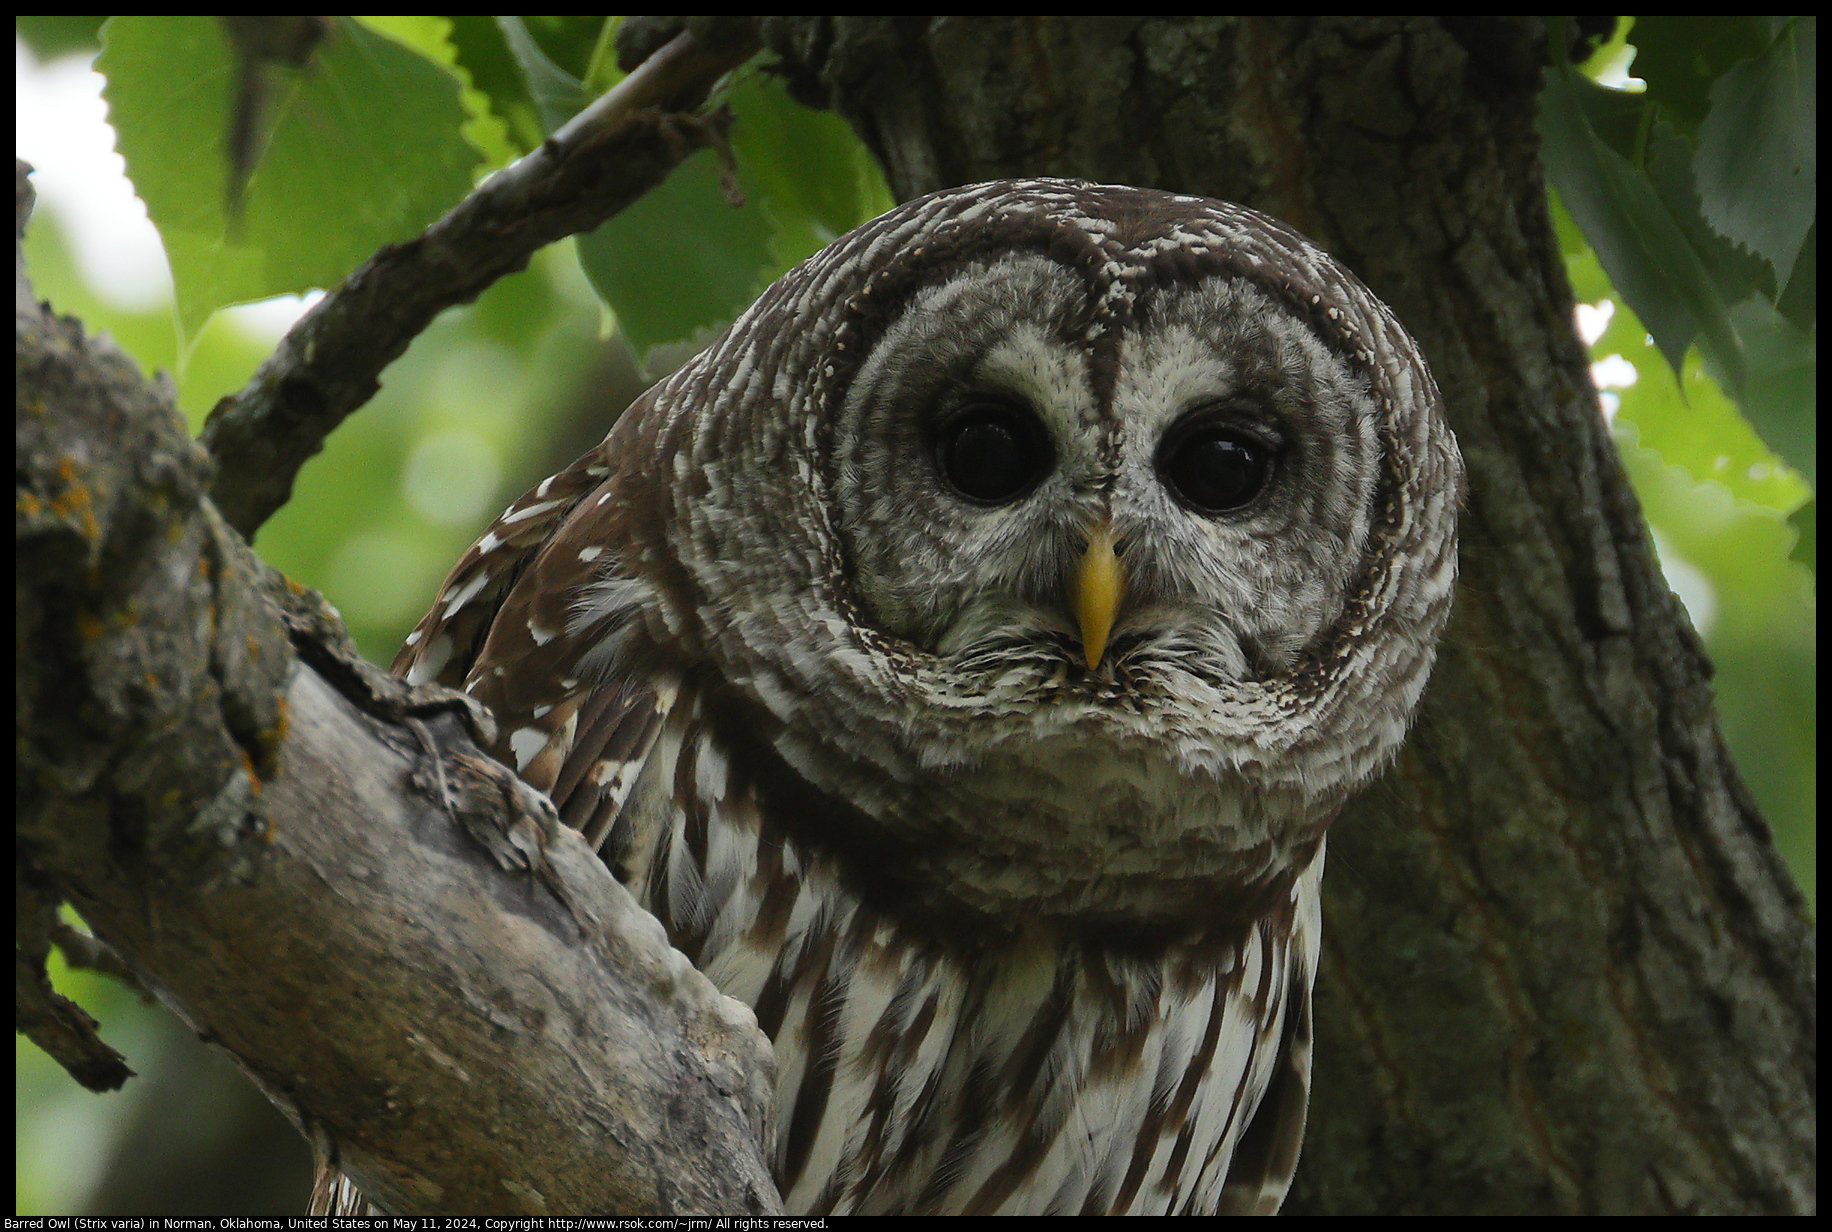 Barred Owl (Strix varia) in Norman, Oklahoma, United States on May 11, 2024